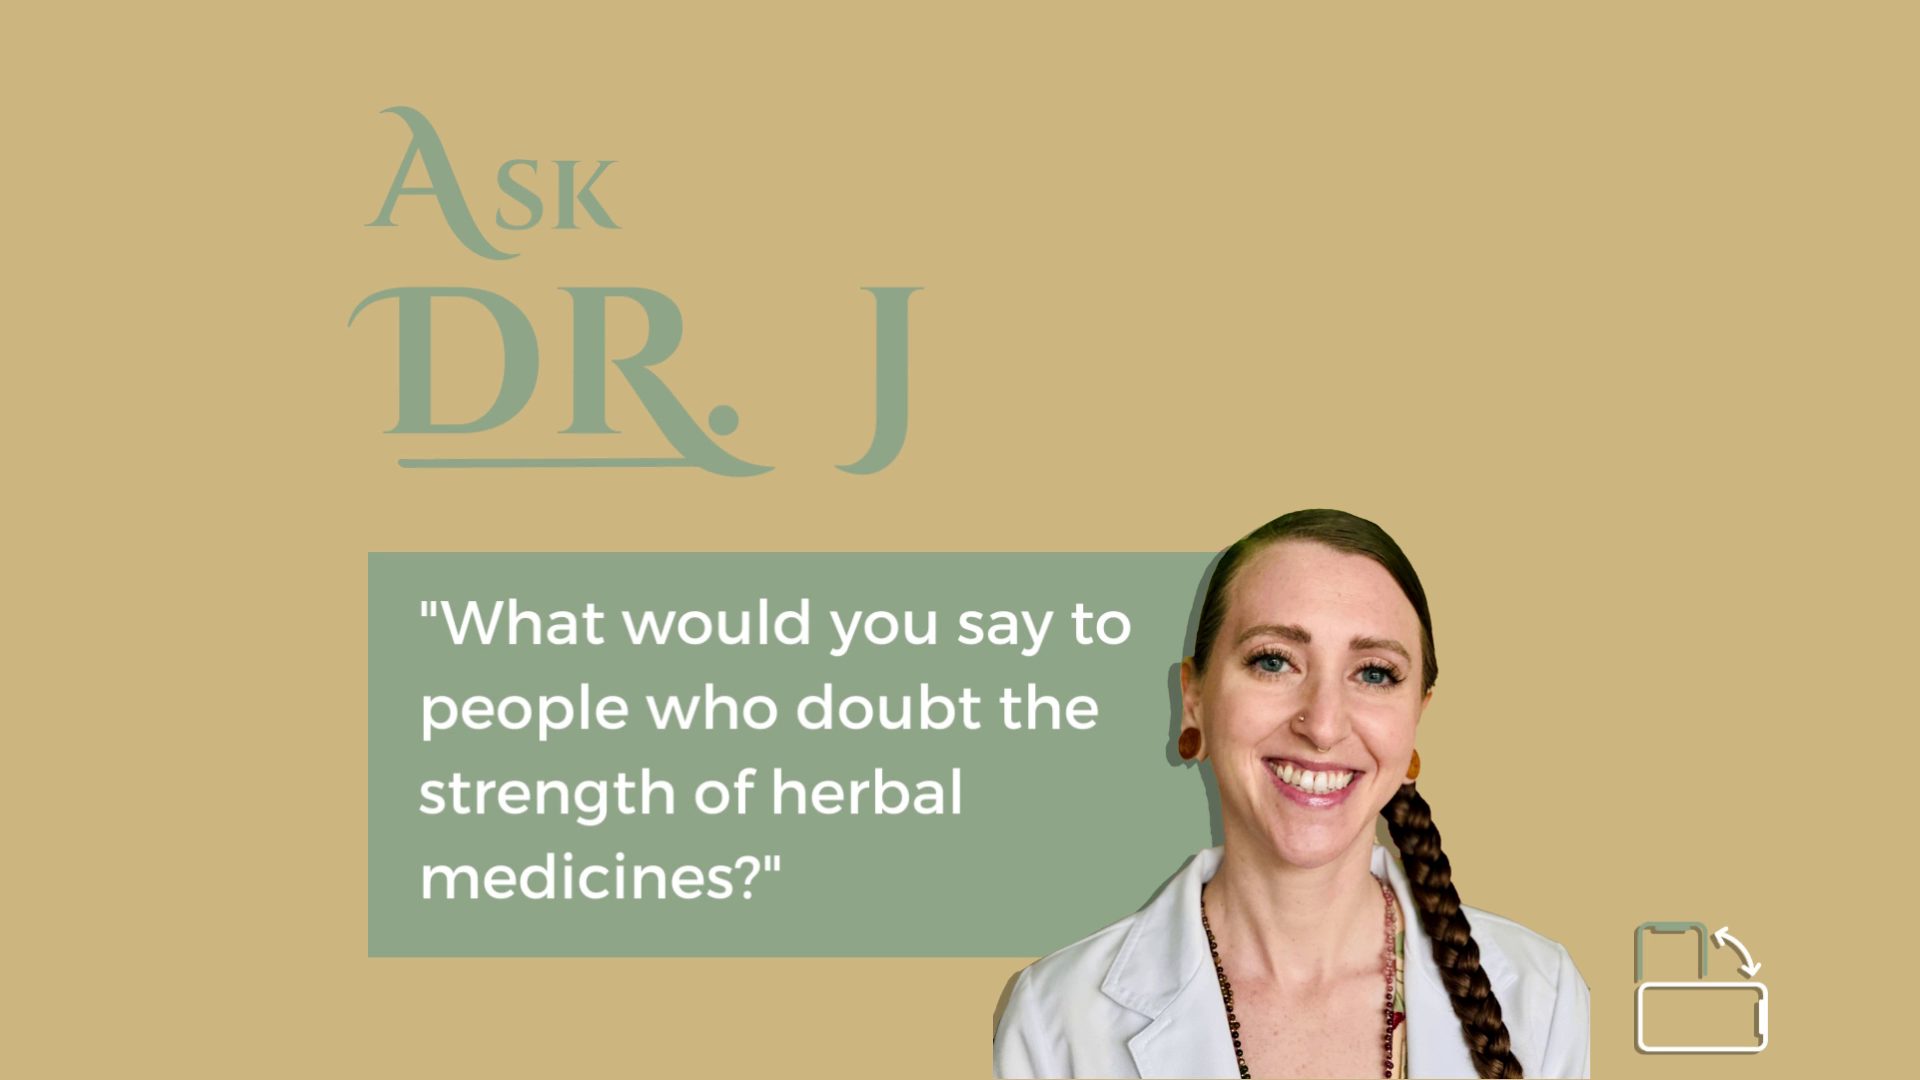 Load video: What would you say to people who doubt the strength of herbal medicines?